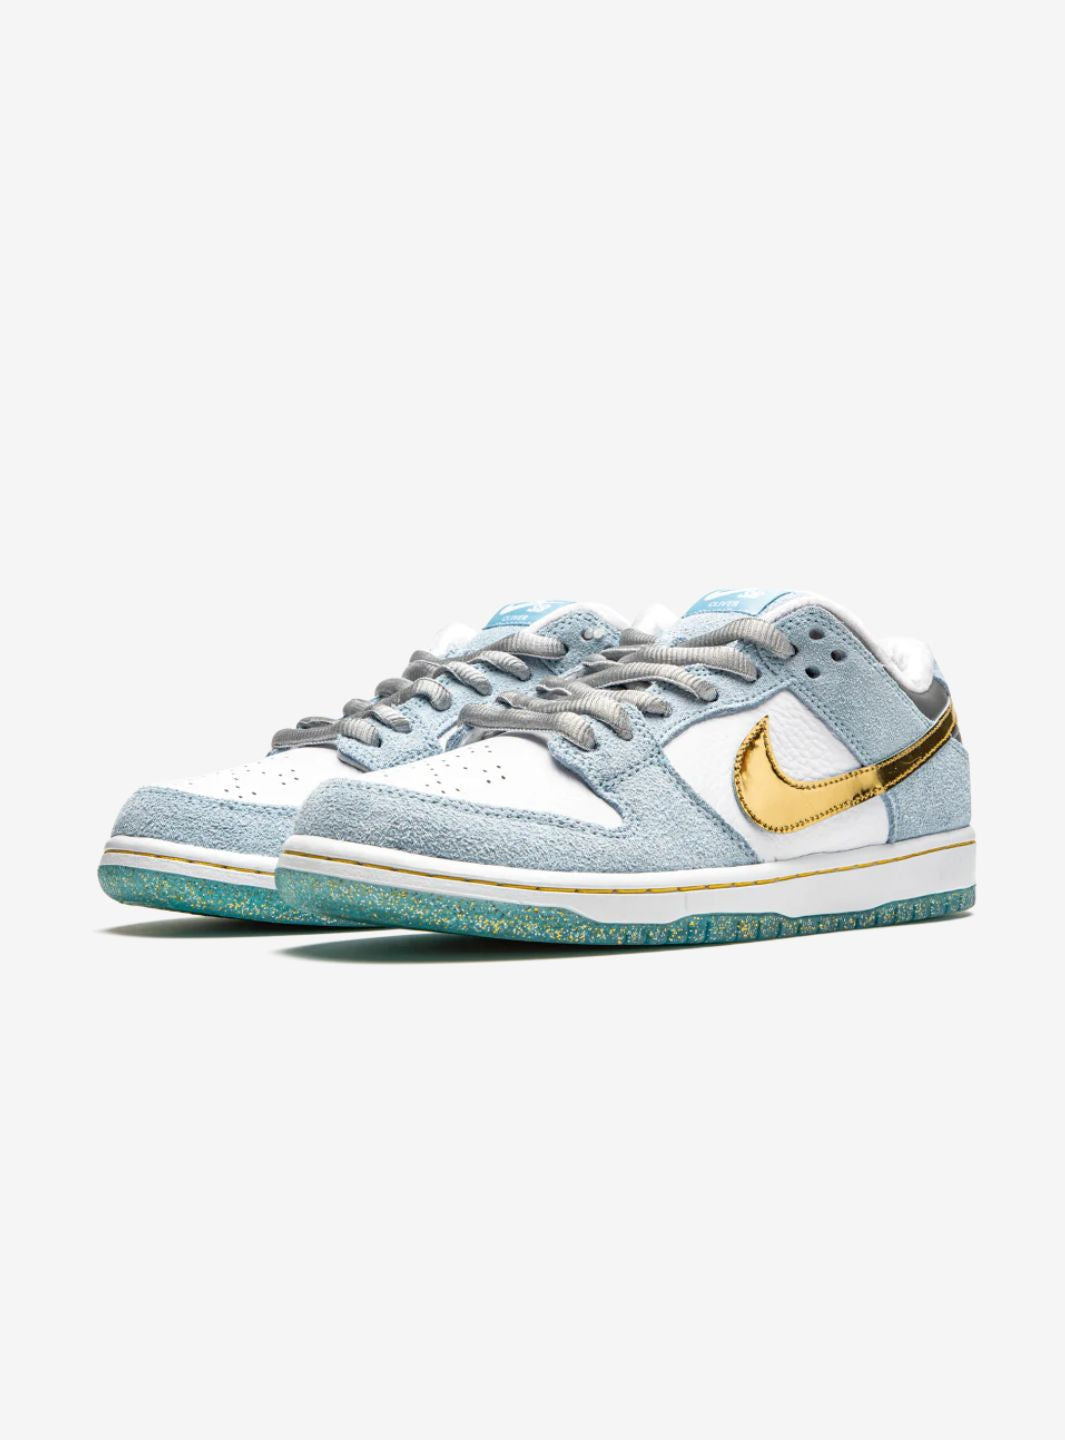 Nike SB Dunk Low Sean Cliver - DC9936-100 | ResellZone